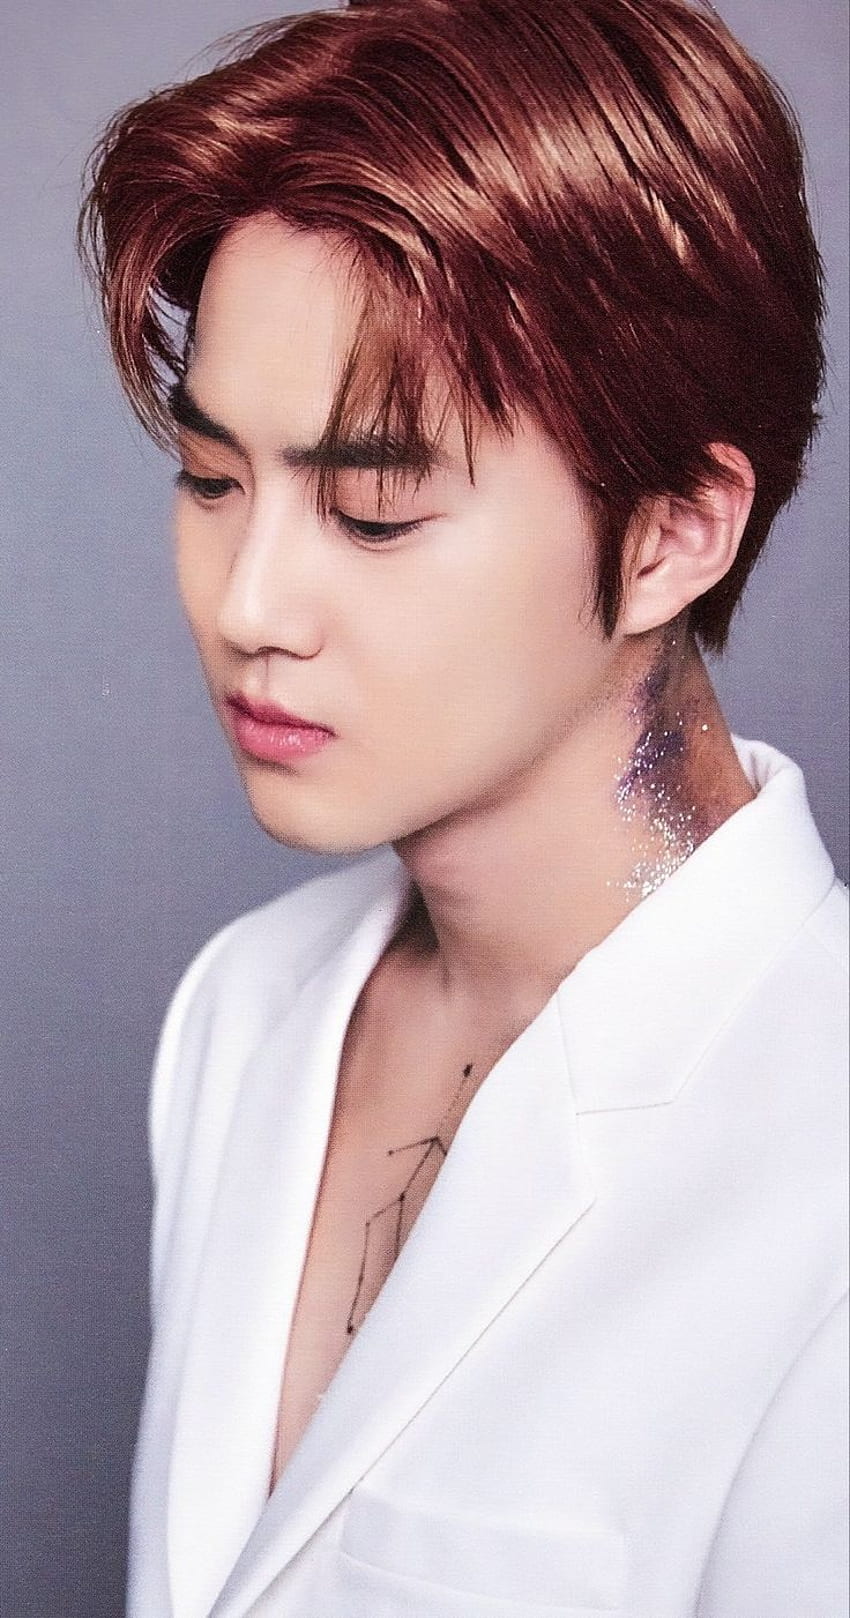 Suho images Suho HD wallpaper and background photos